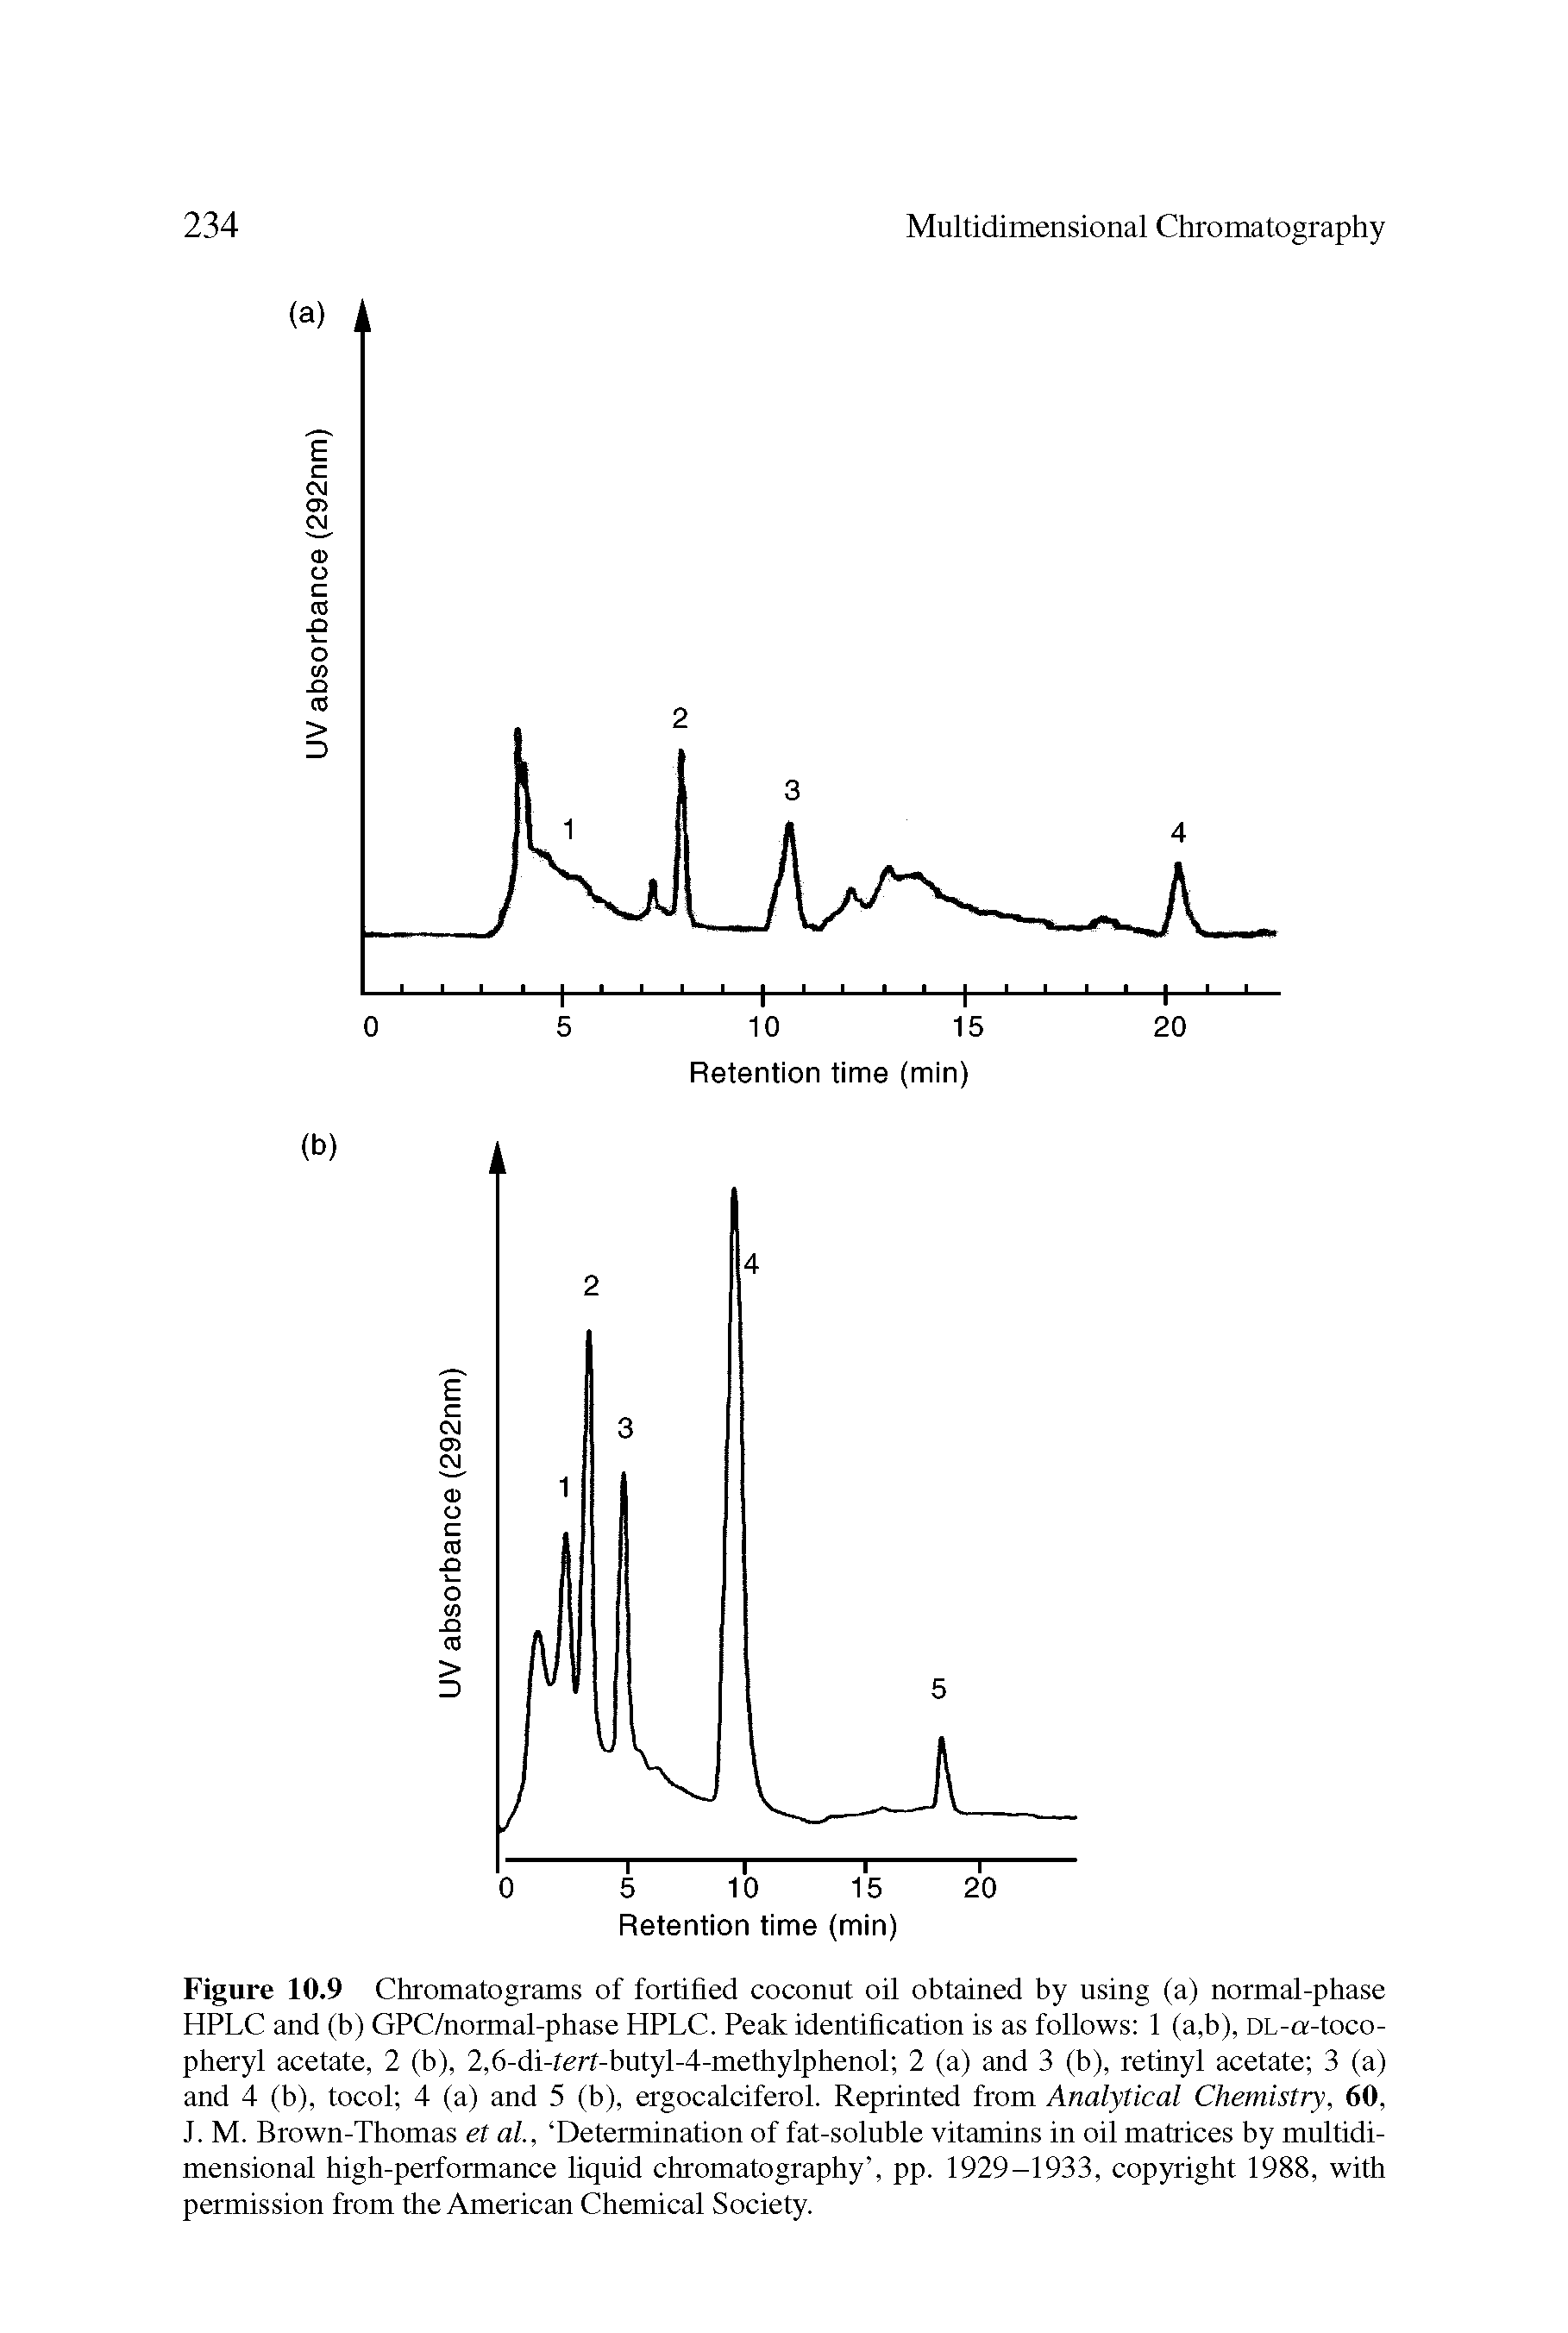 Figure 10.9 Chromatograms of fortified coconut oil obtained by using (a) normal-phase HPLC and (b) GPC/normal-phase HPLC. Peak identification is as follows 1 (a,b), DL-a-toco-pheryl acetate, 2 (b), 2,6-di-terf-butyl-4-methylphenol 2 (a) and 3 (b), retinyl acetate 3 (a) and 4 (b), tocol 4 (a) and 5 (b), ergocalciferol. Reprinted from Analytical Chemistry, 60, J. M. Brown-Thomas et al., Determination of fat-soluble vitamins in oil matrices by multidimensional high-performance liquid chromatography , pp. 1929-1933, copyright 1988, with permission from the American Chemical Society.